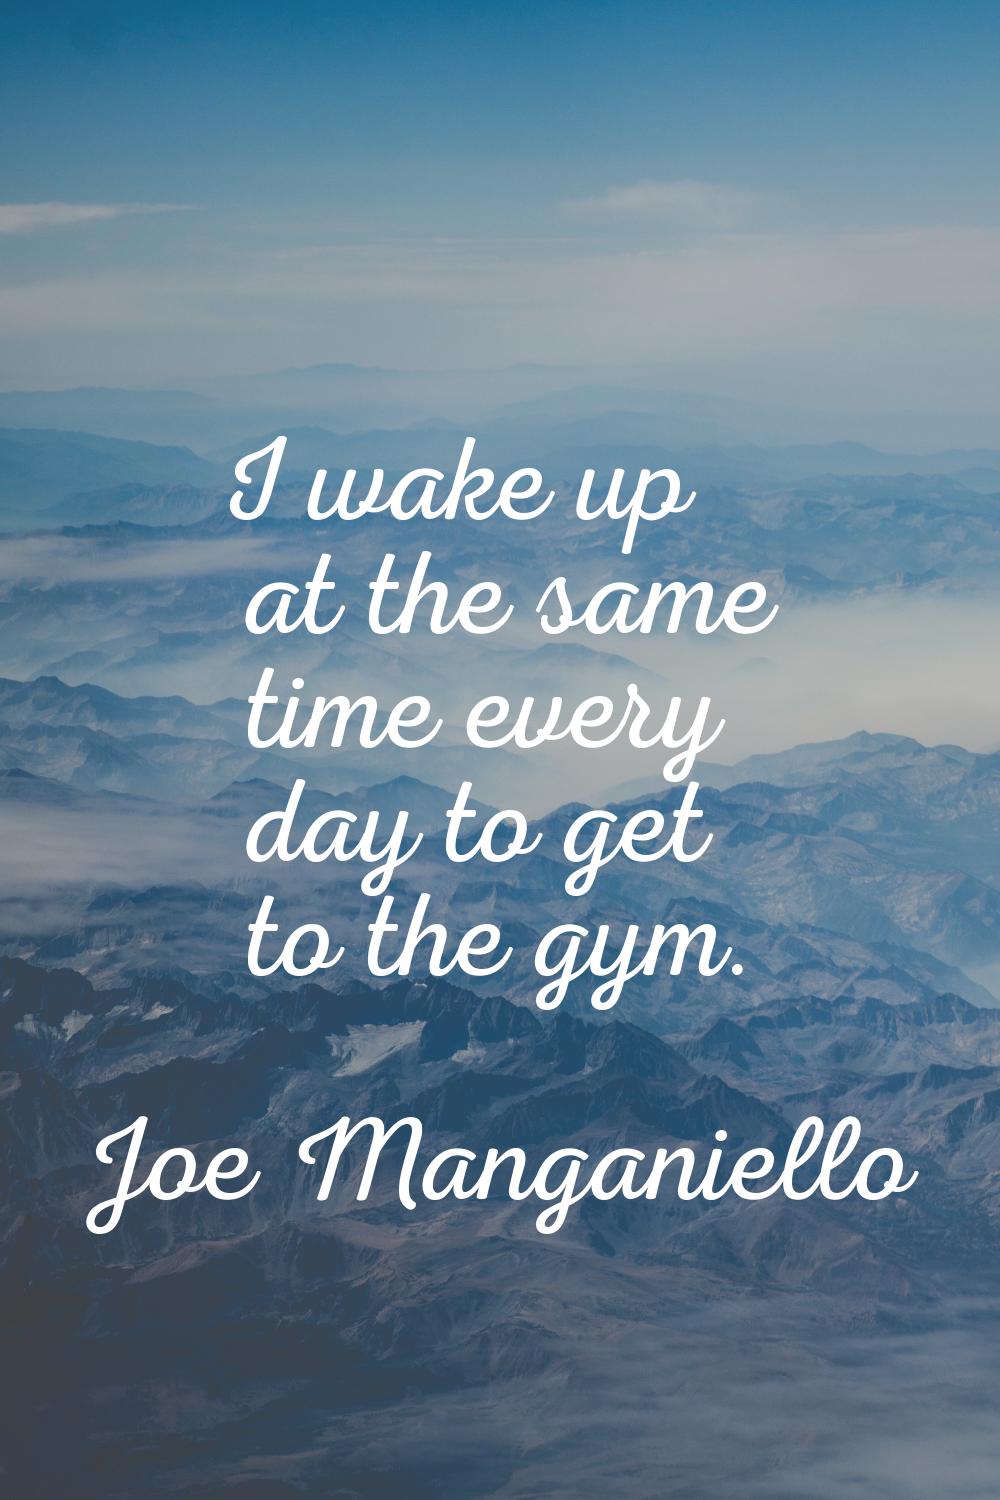 I wake up at the same time every day to get to the gym.